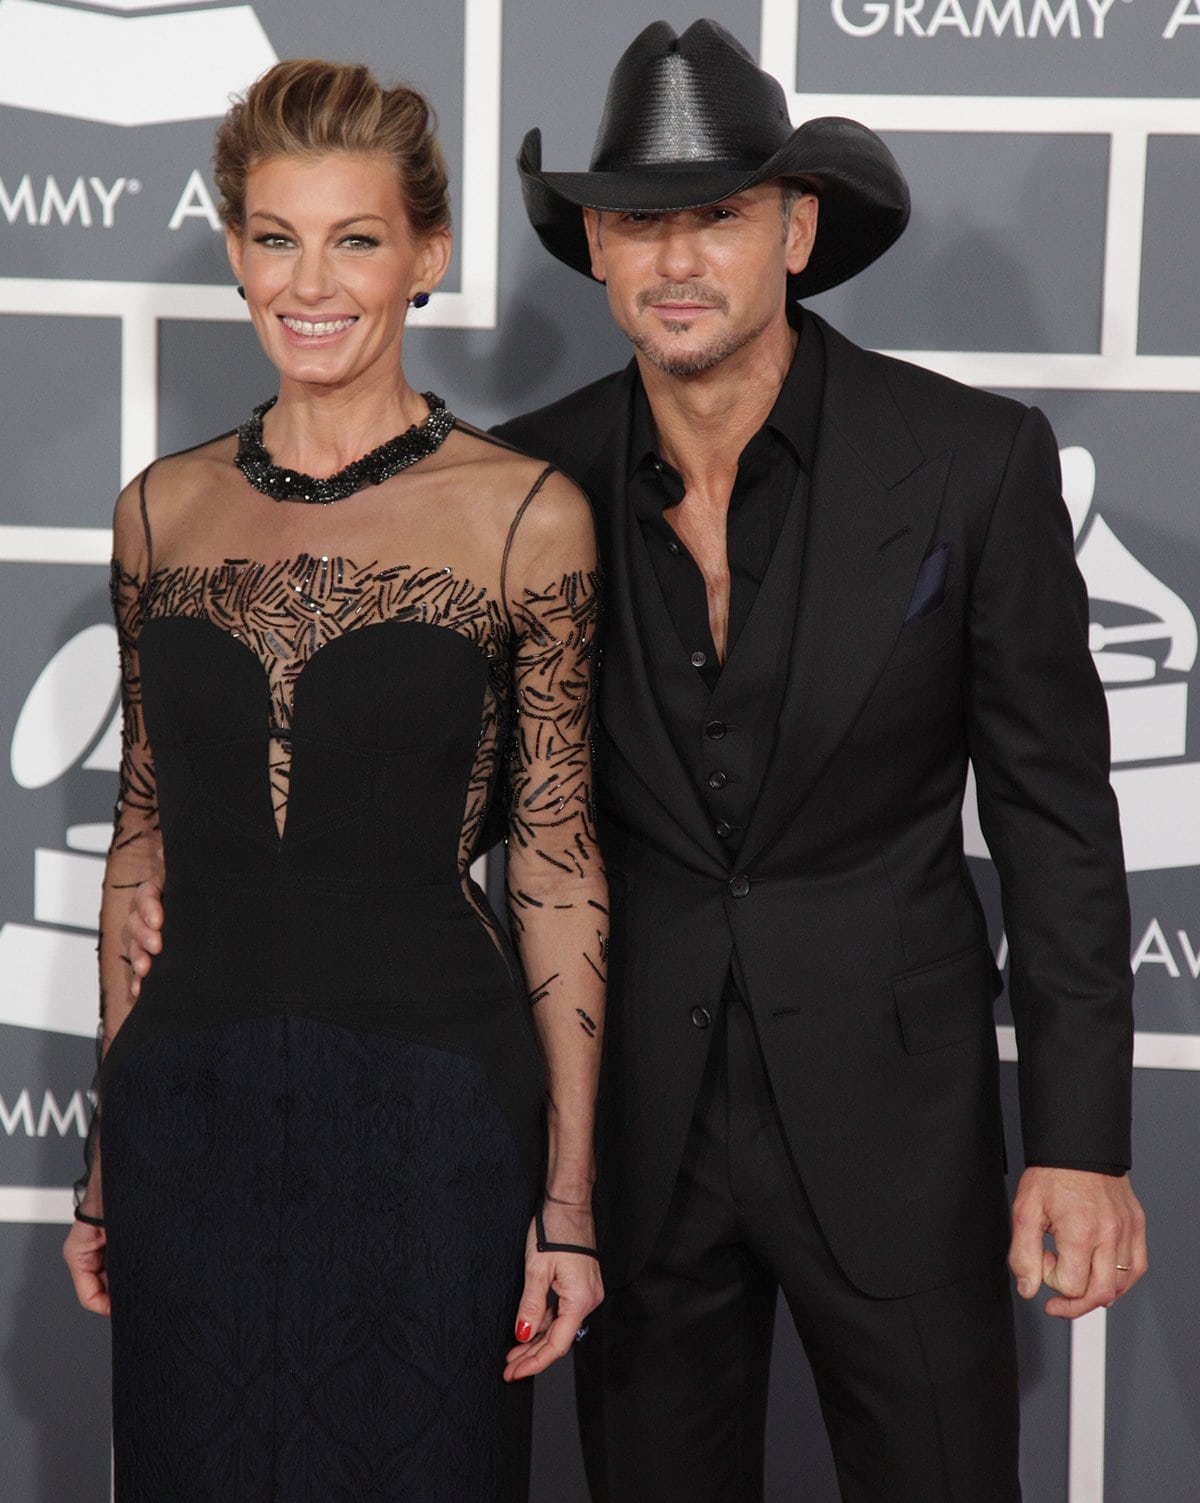 Faith Hill in a black in J. Mendel Pre-Fall 2013 cocktail dress and her husband Tim McGraw arrive at the 55th Annual Grammy Awards